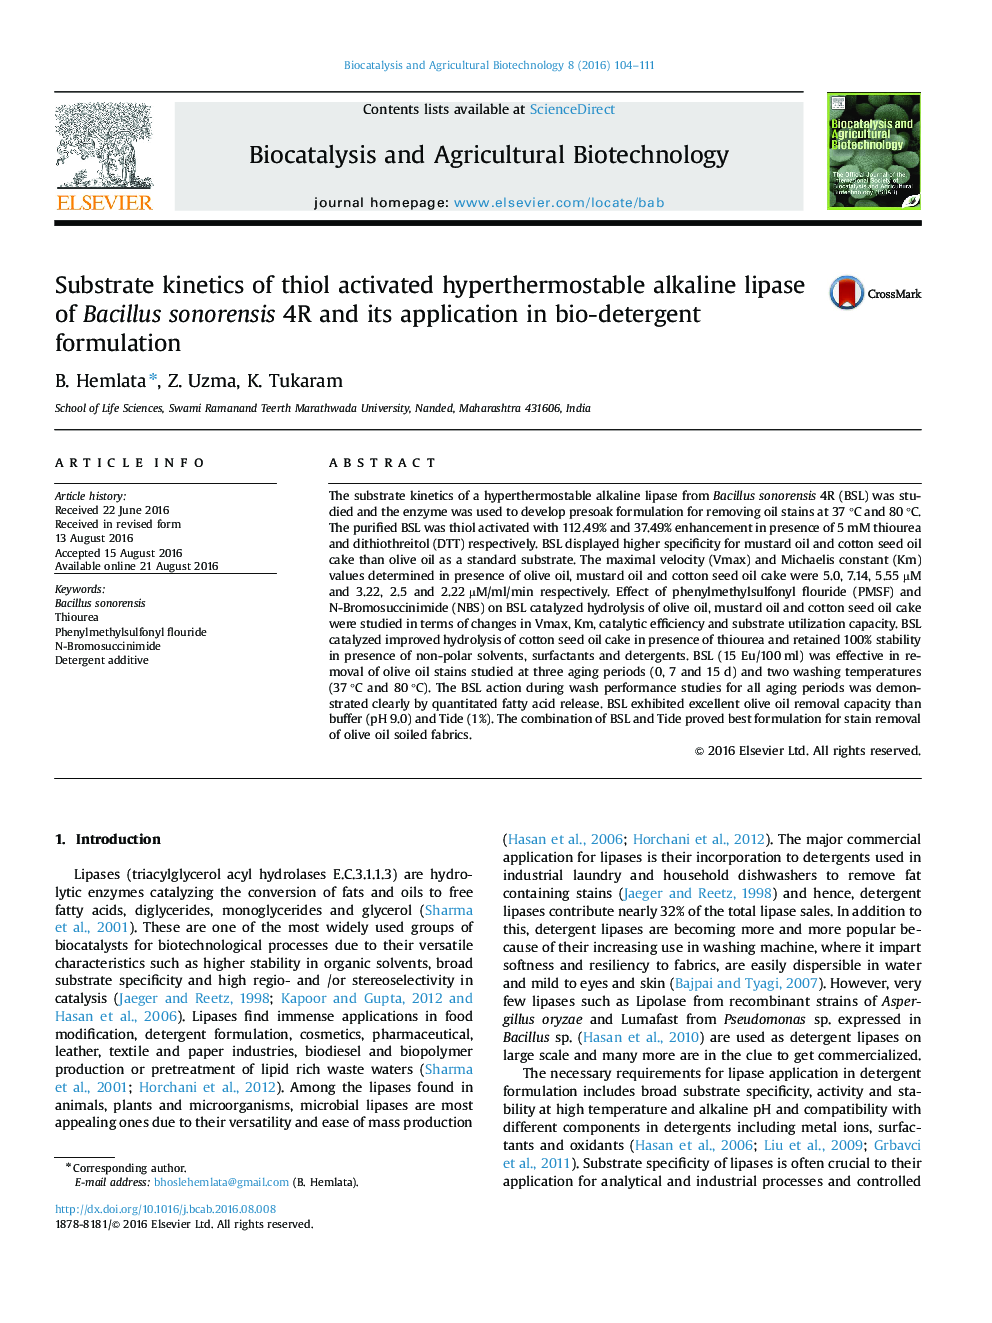 Substrate kinetics of thiol activated hyperthermostable alkaline lipase of Bacillus sonorensis 4R and its application in bio-detergent formulation